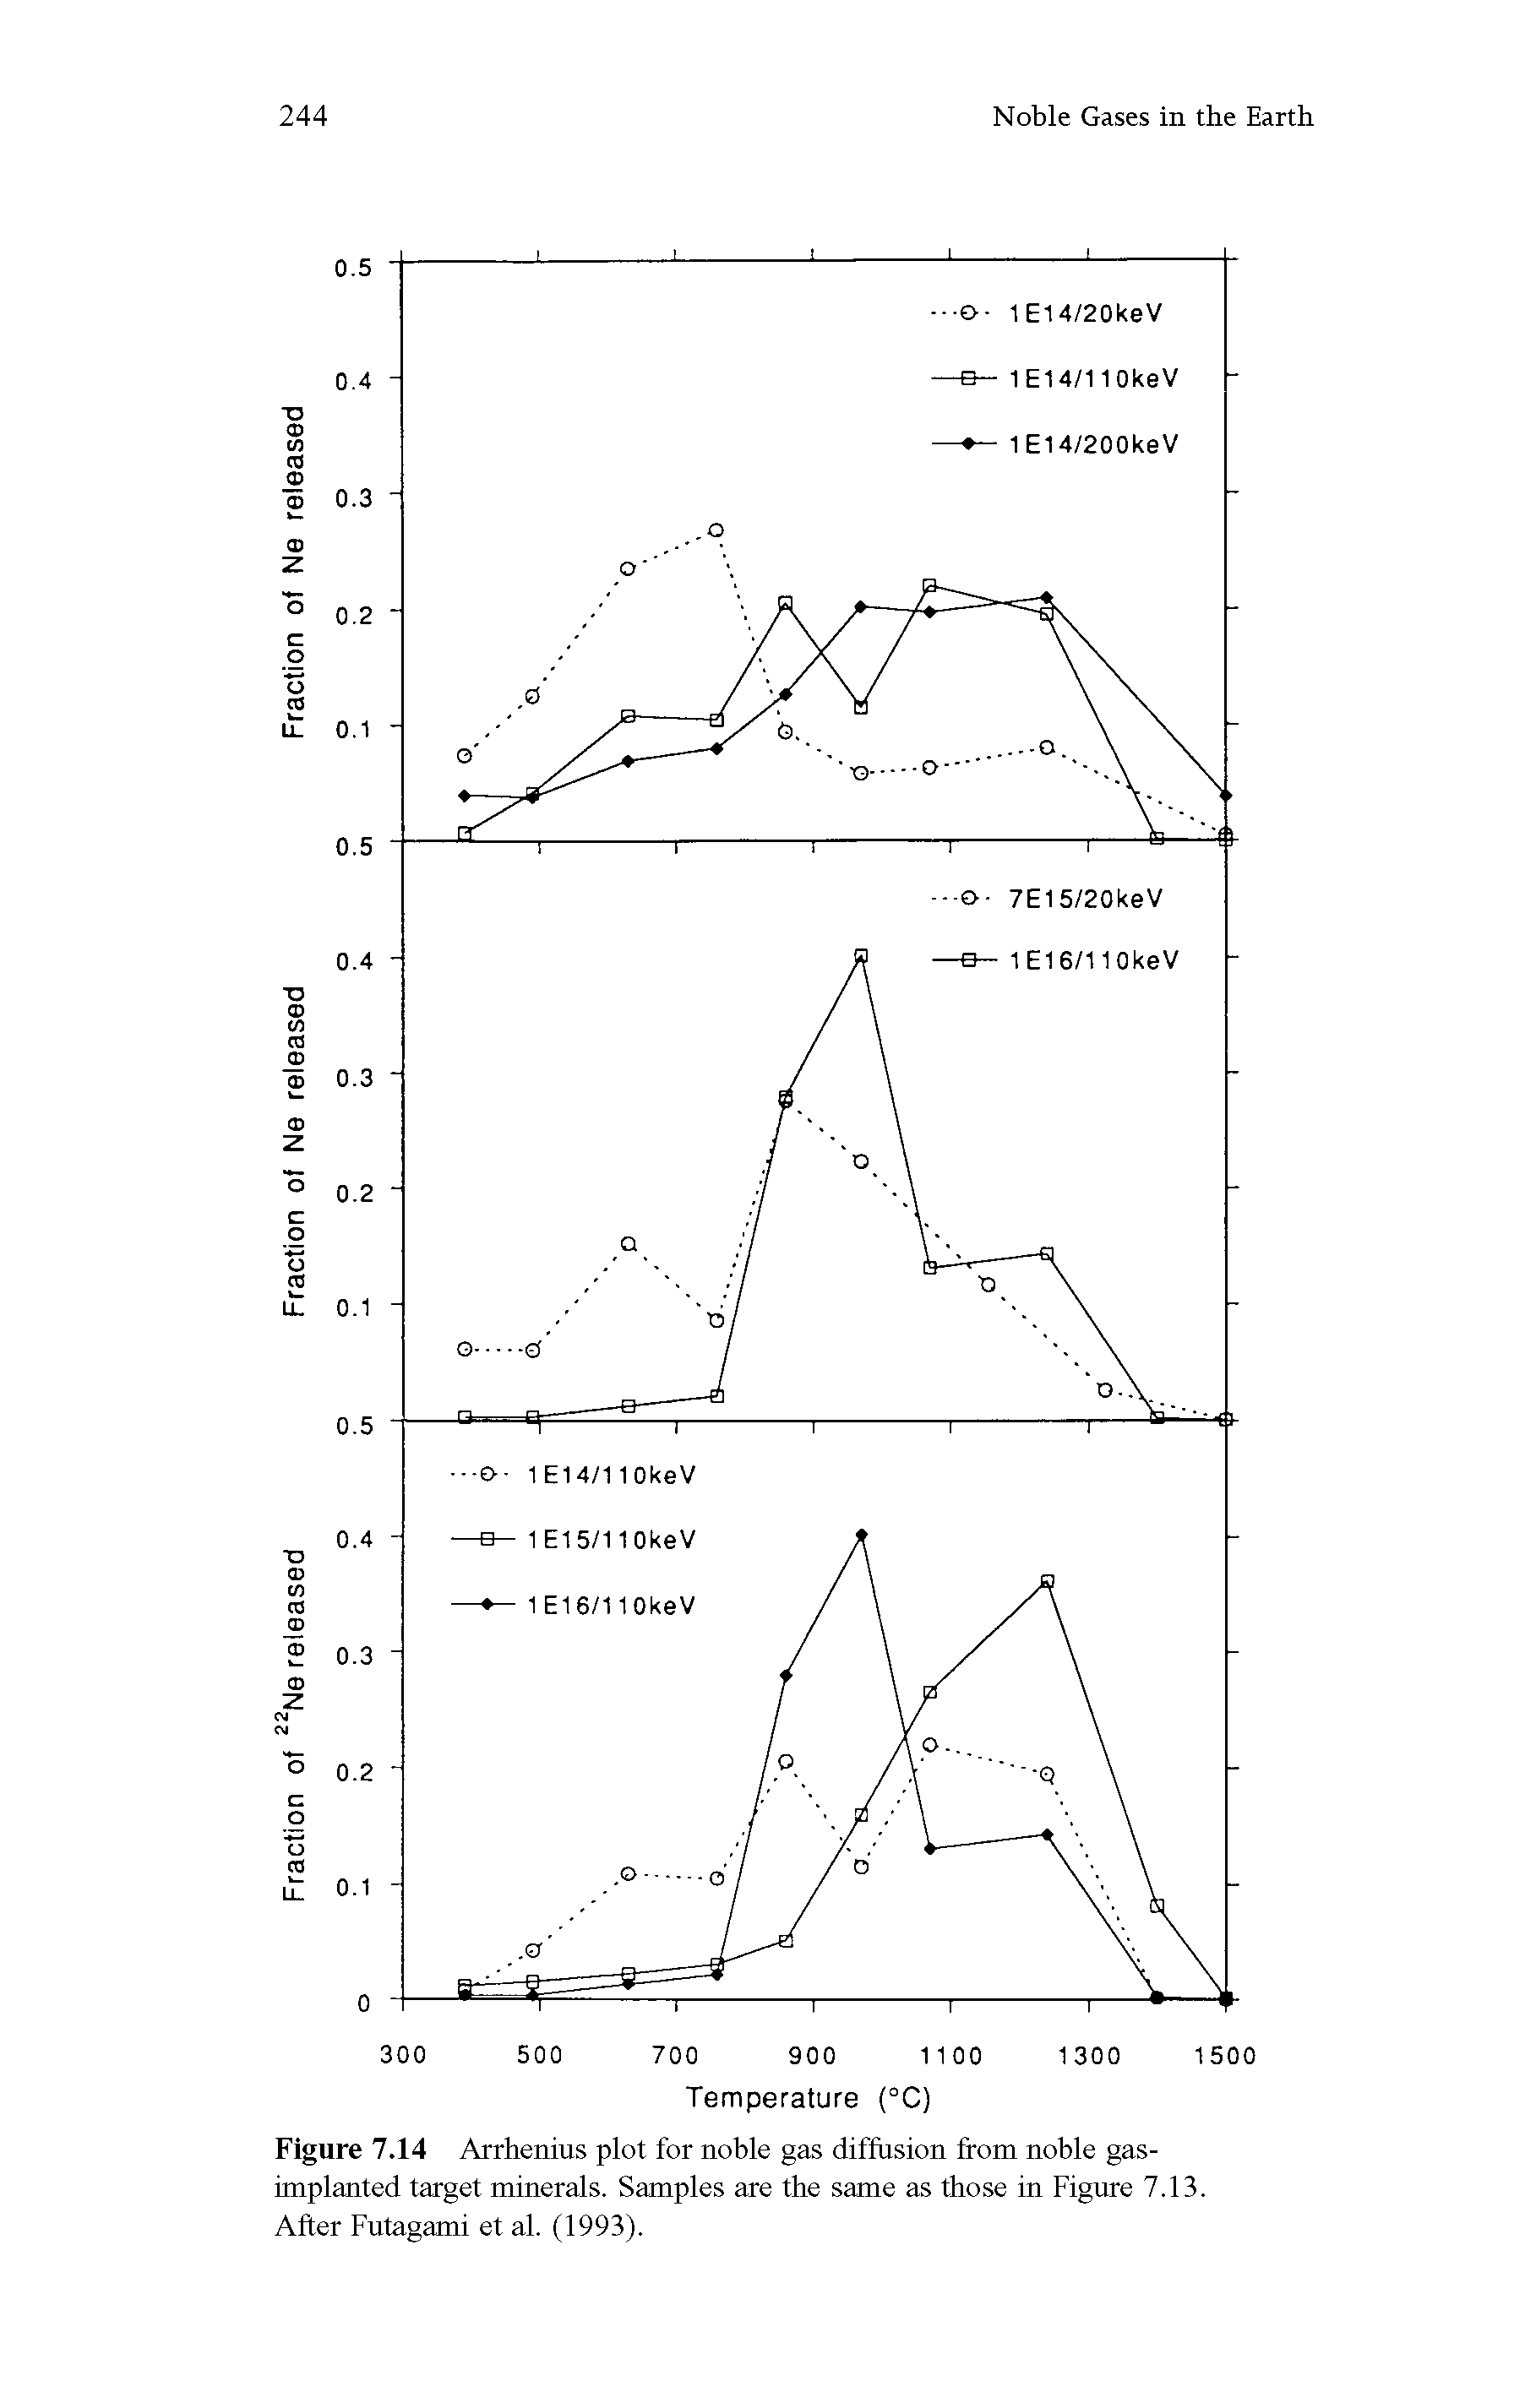 Figure 7.14 Arrhenius plot for noble gas diffusion from noble gas-implanted target minerals. Samples are the same as those in Figure 7.13. After Futagami et al. (1993).